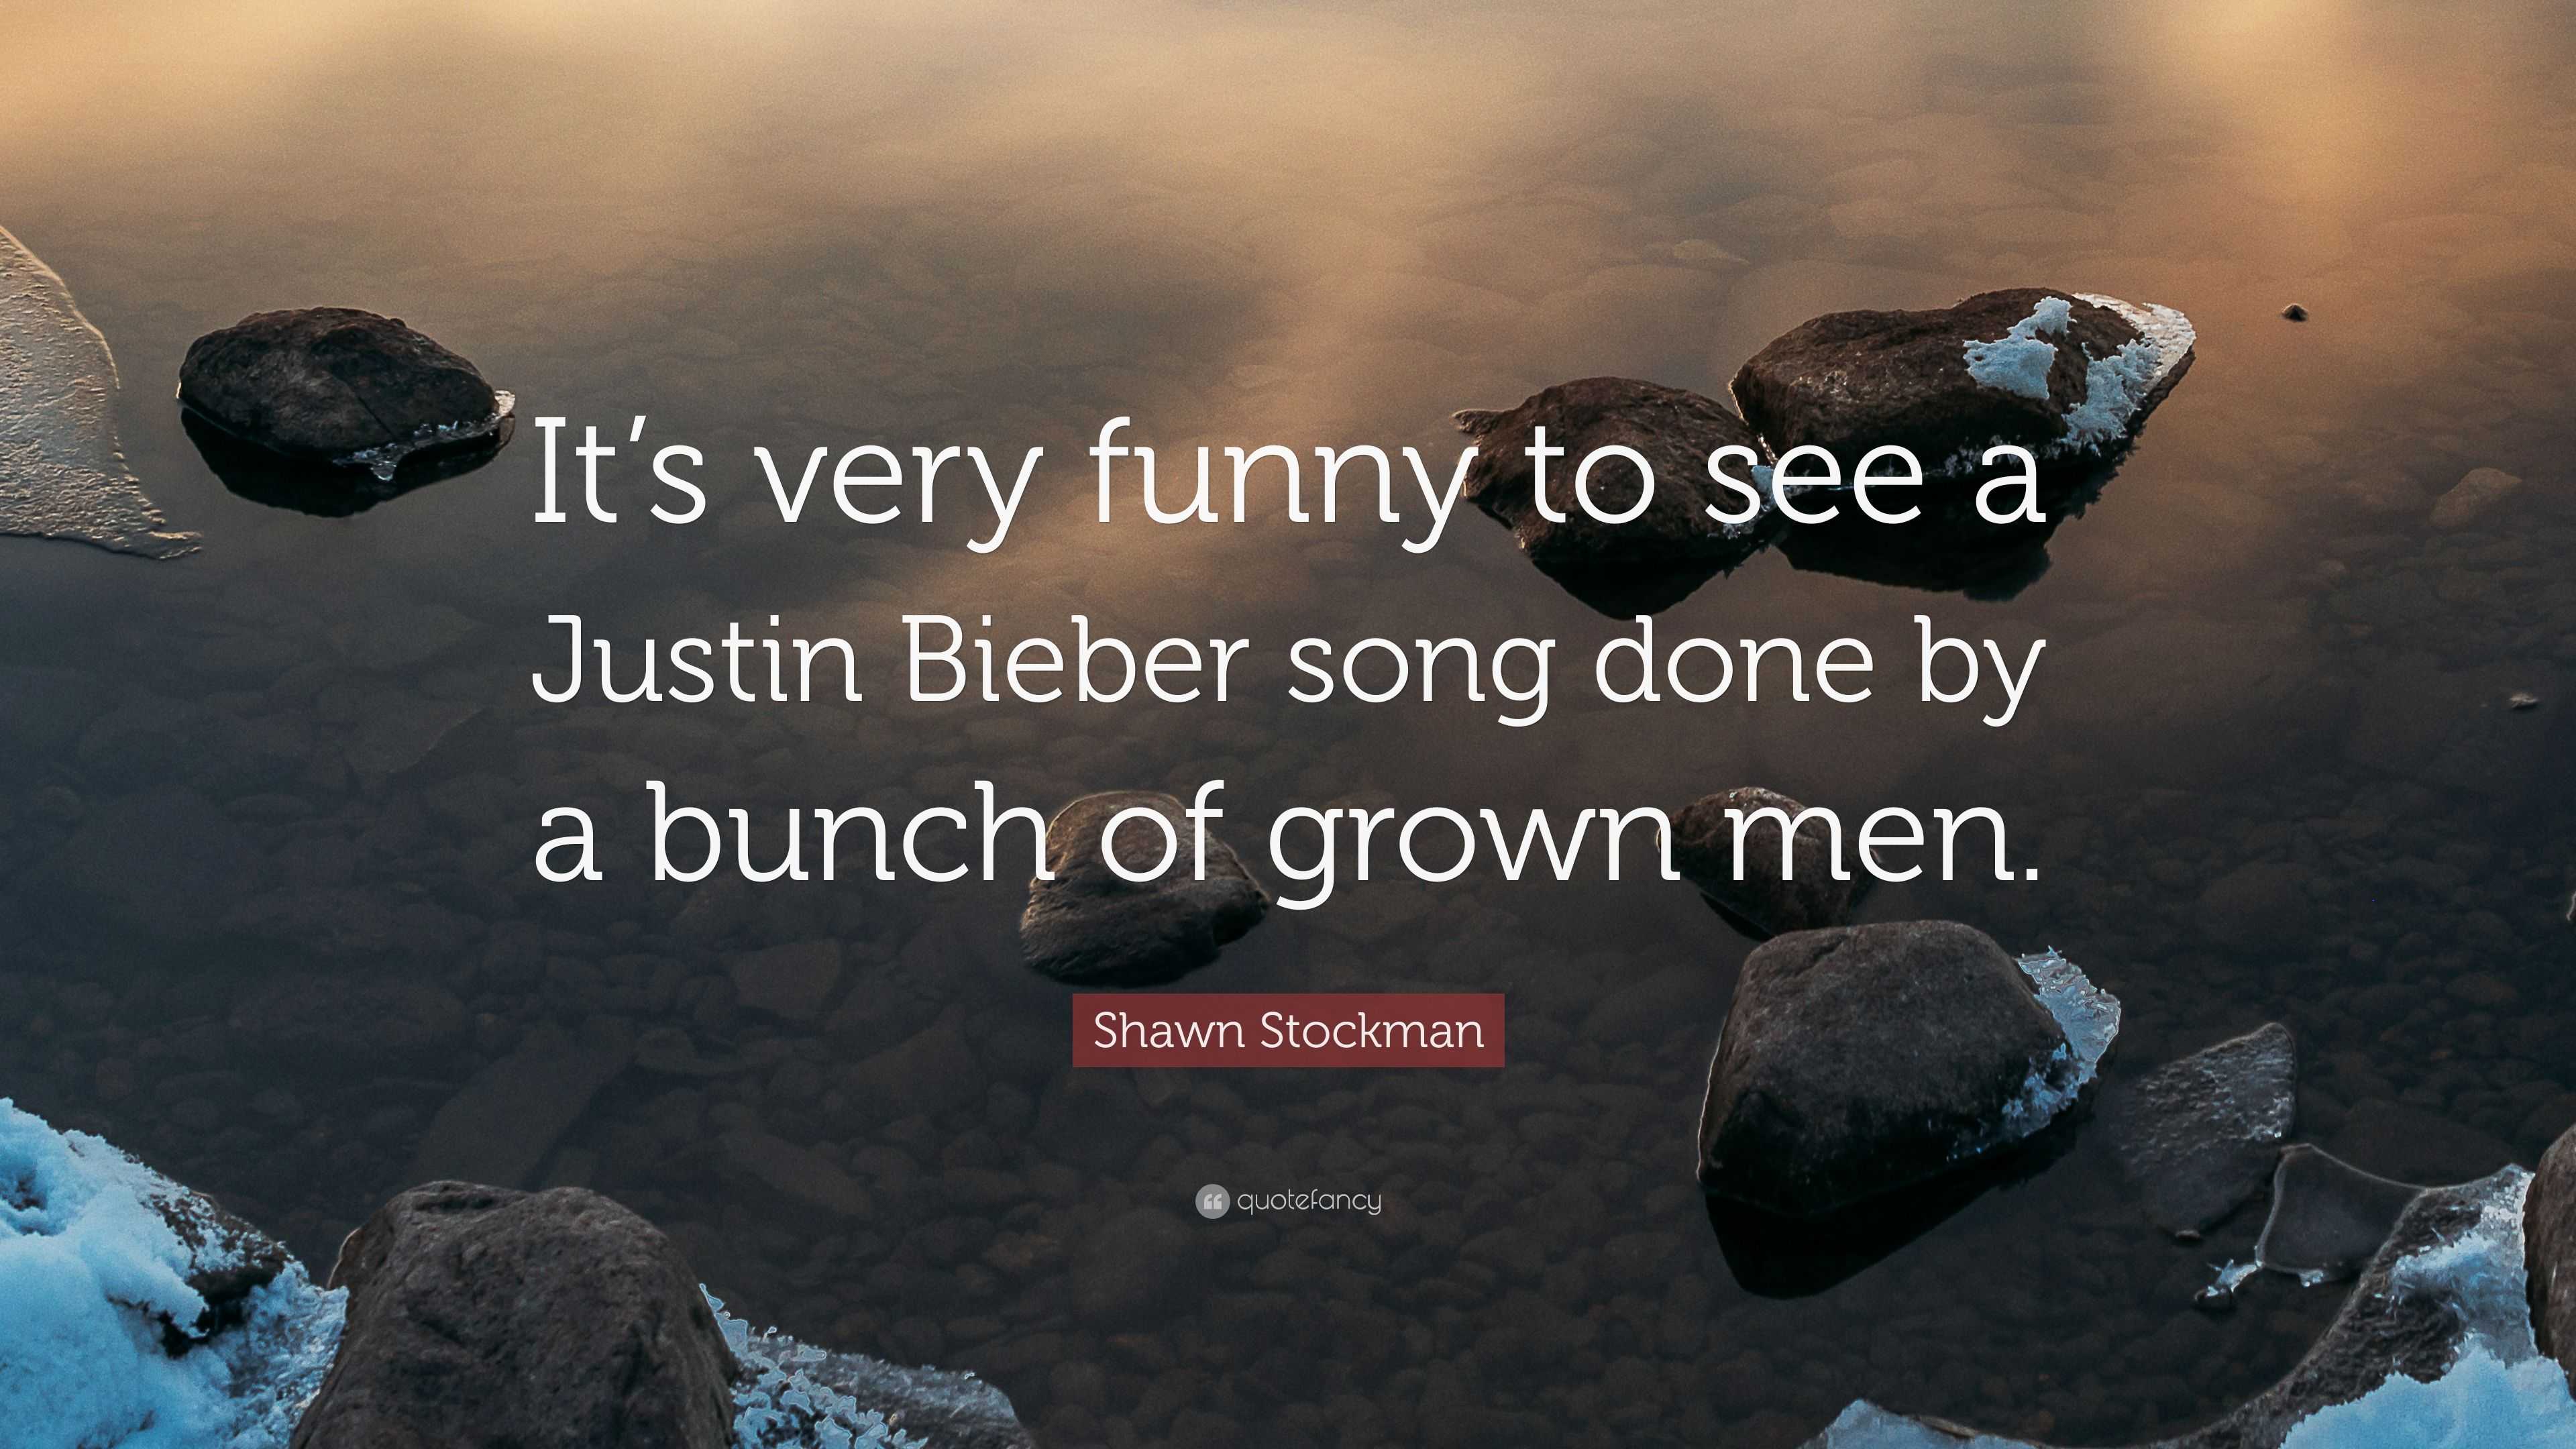 Shawn Stockman Quote: “It's very funny to see a Justin Bieber song done by  a bunch